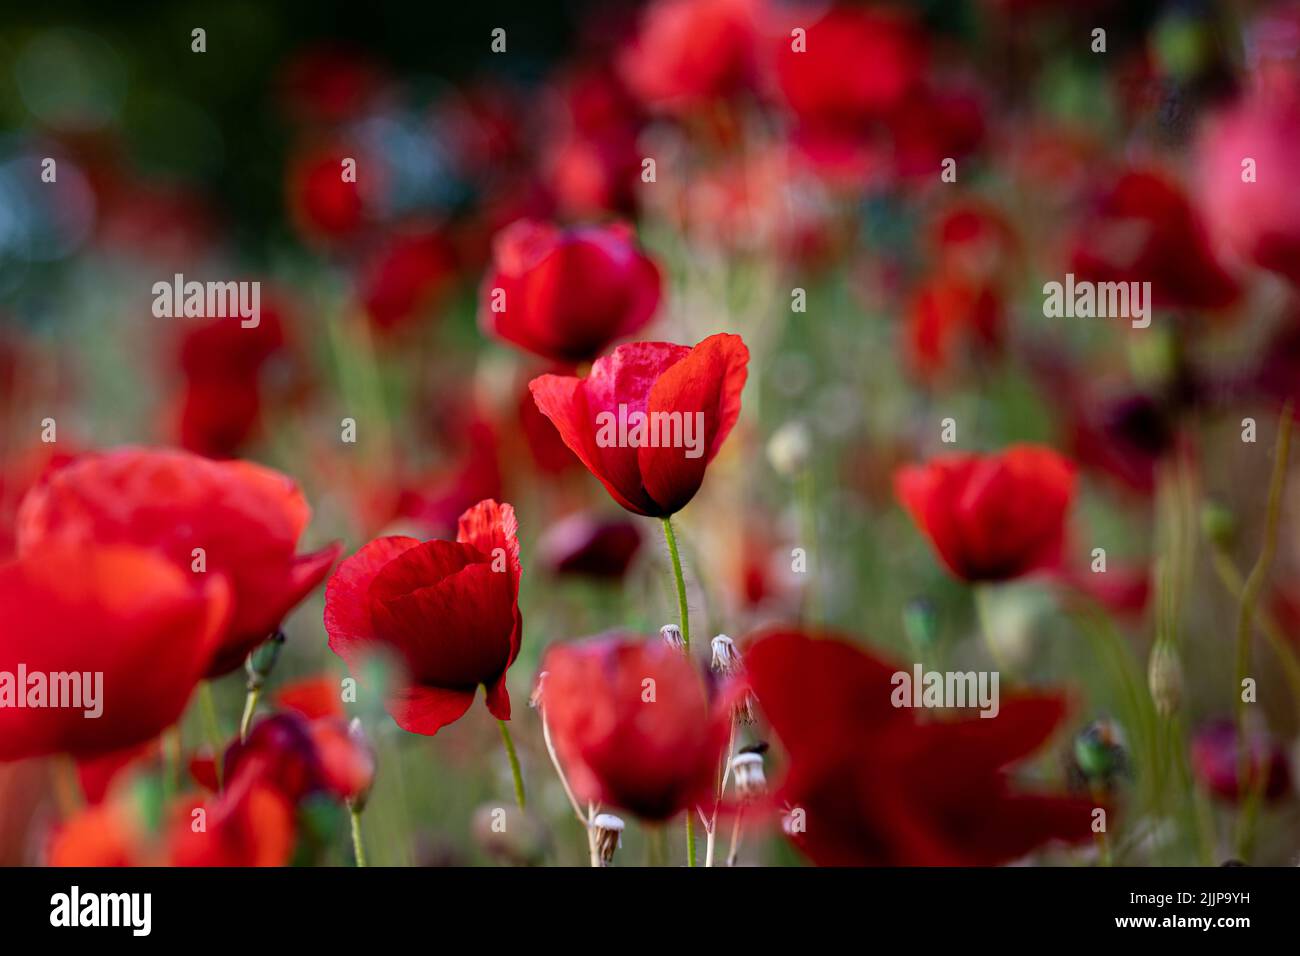 A scenic view of red common poppy flowers on a field in a blurred background Stock Photo